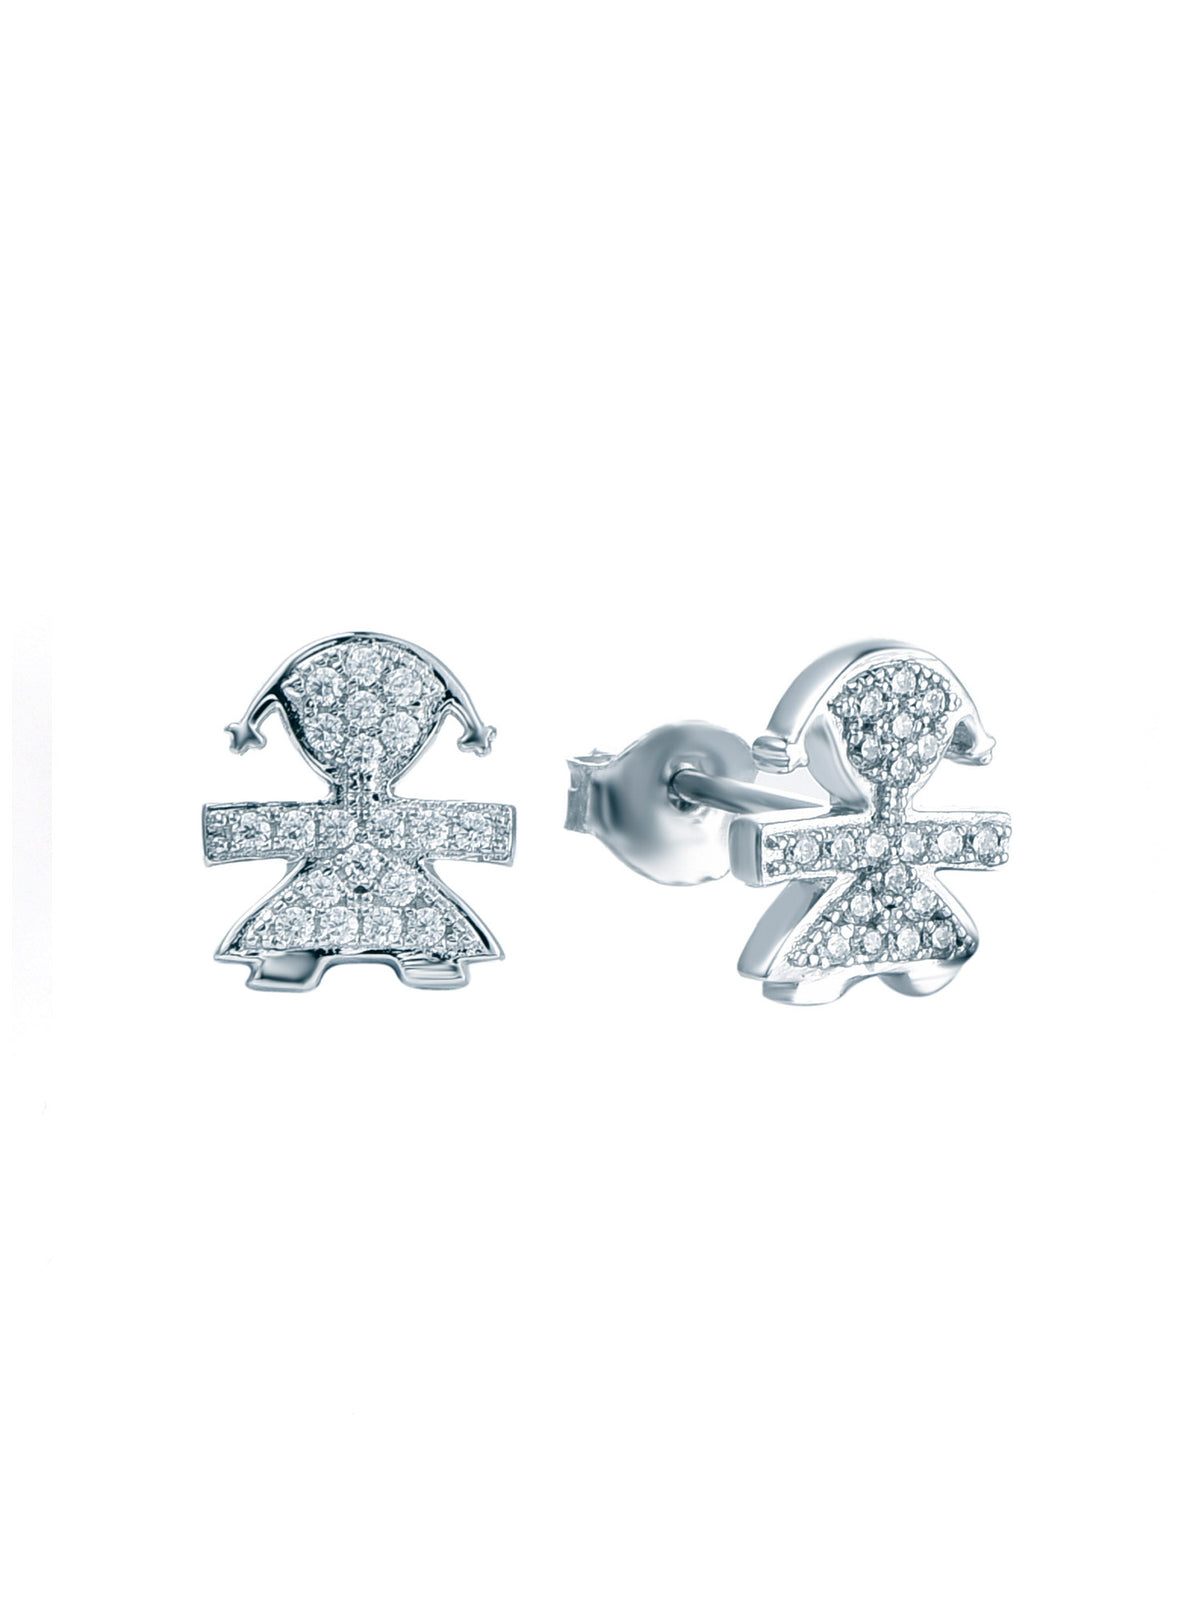 GIRL CHILD SHAPED AMERICAN DIAMONDS 925 SILVER STUDS FOR KIDS-2